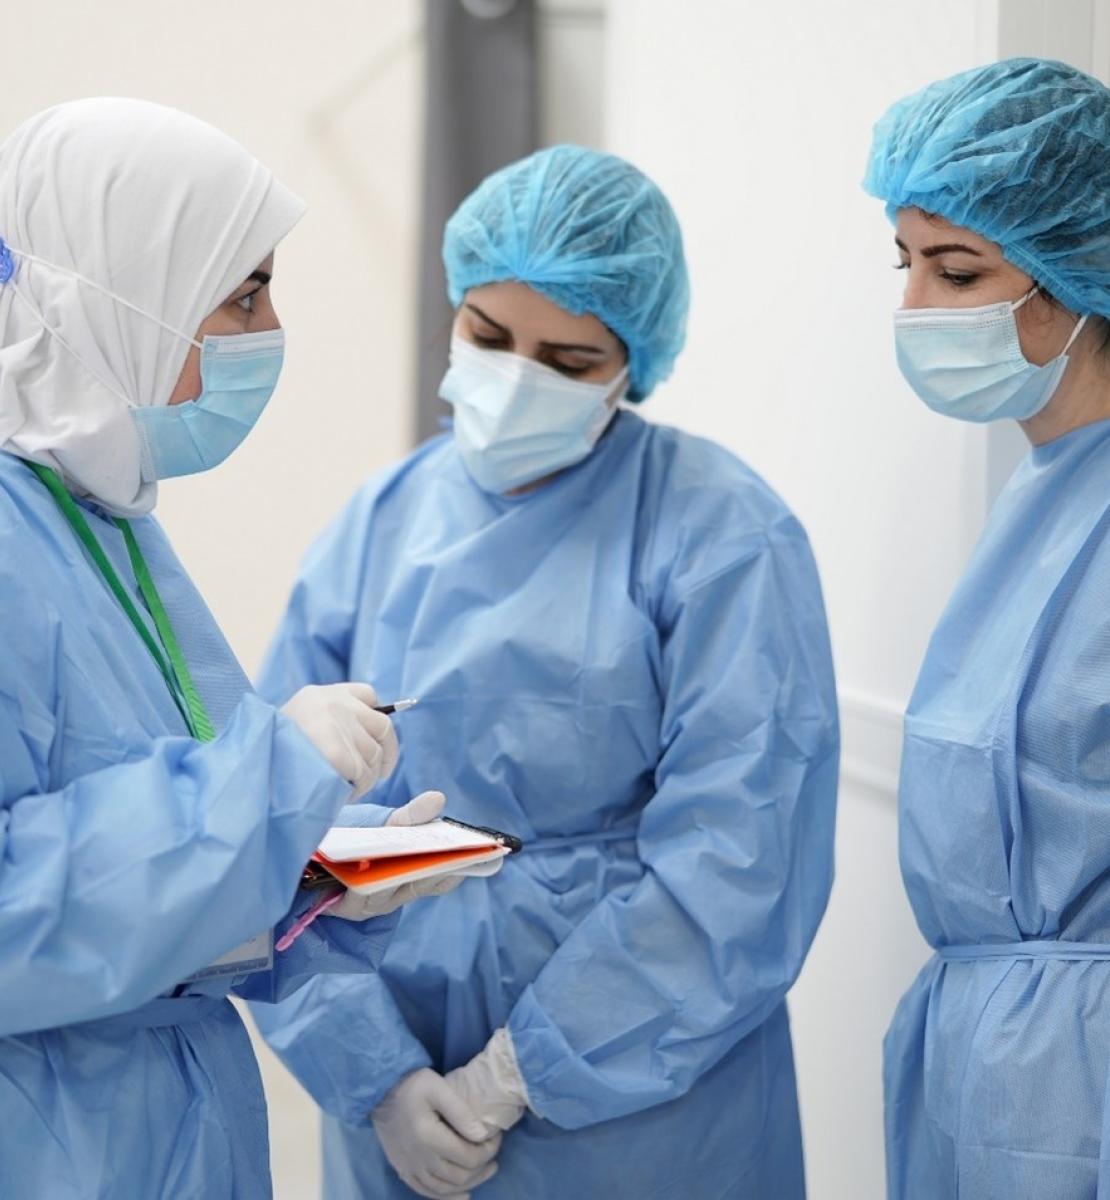 Three medical professionals huddle together, all wearing scrubs. 